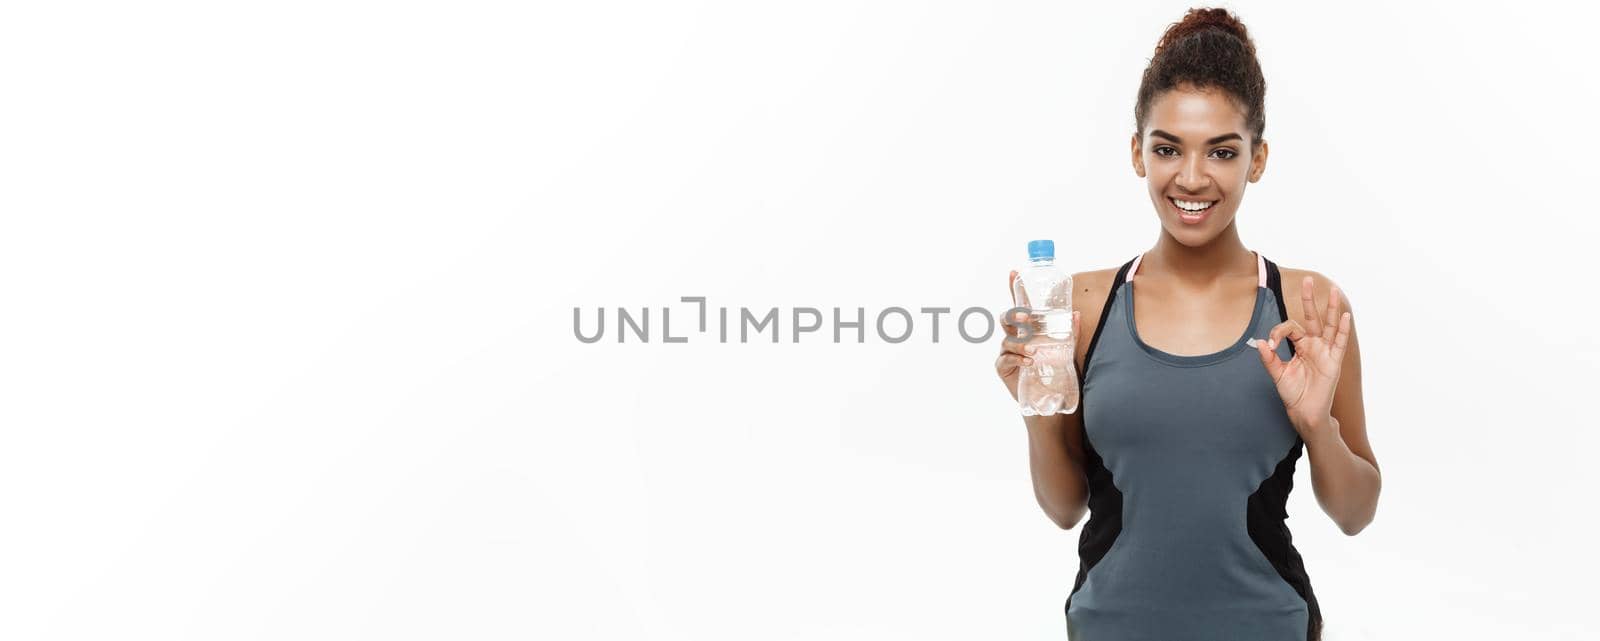 Healthy and Fitness concept - beautiful African American girl in sport clothes holding plastic water bottle after workout. Isolated on white studio background.